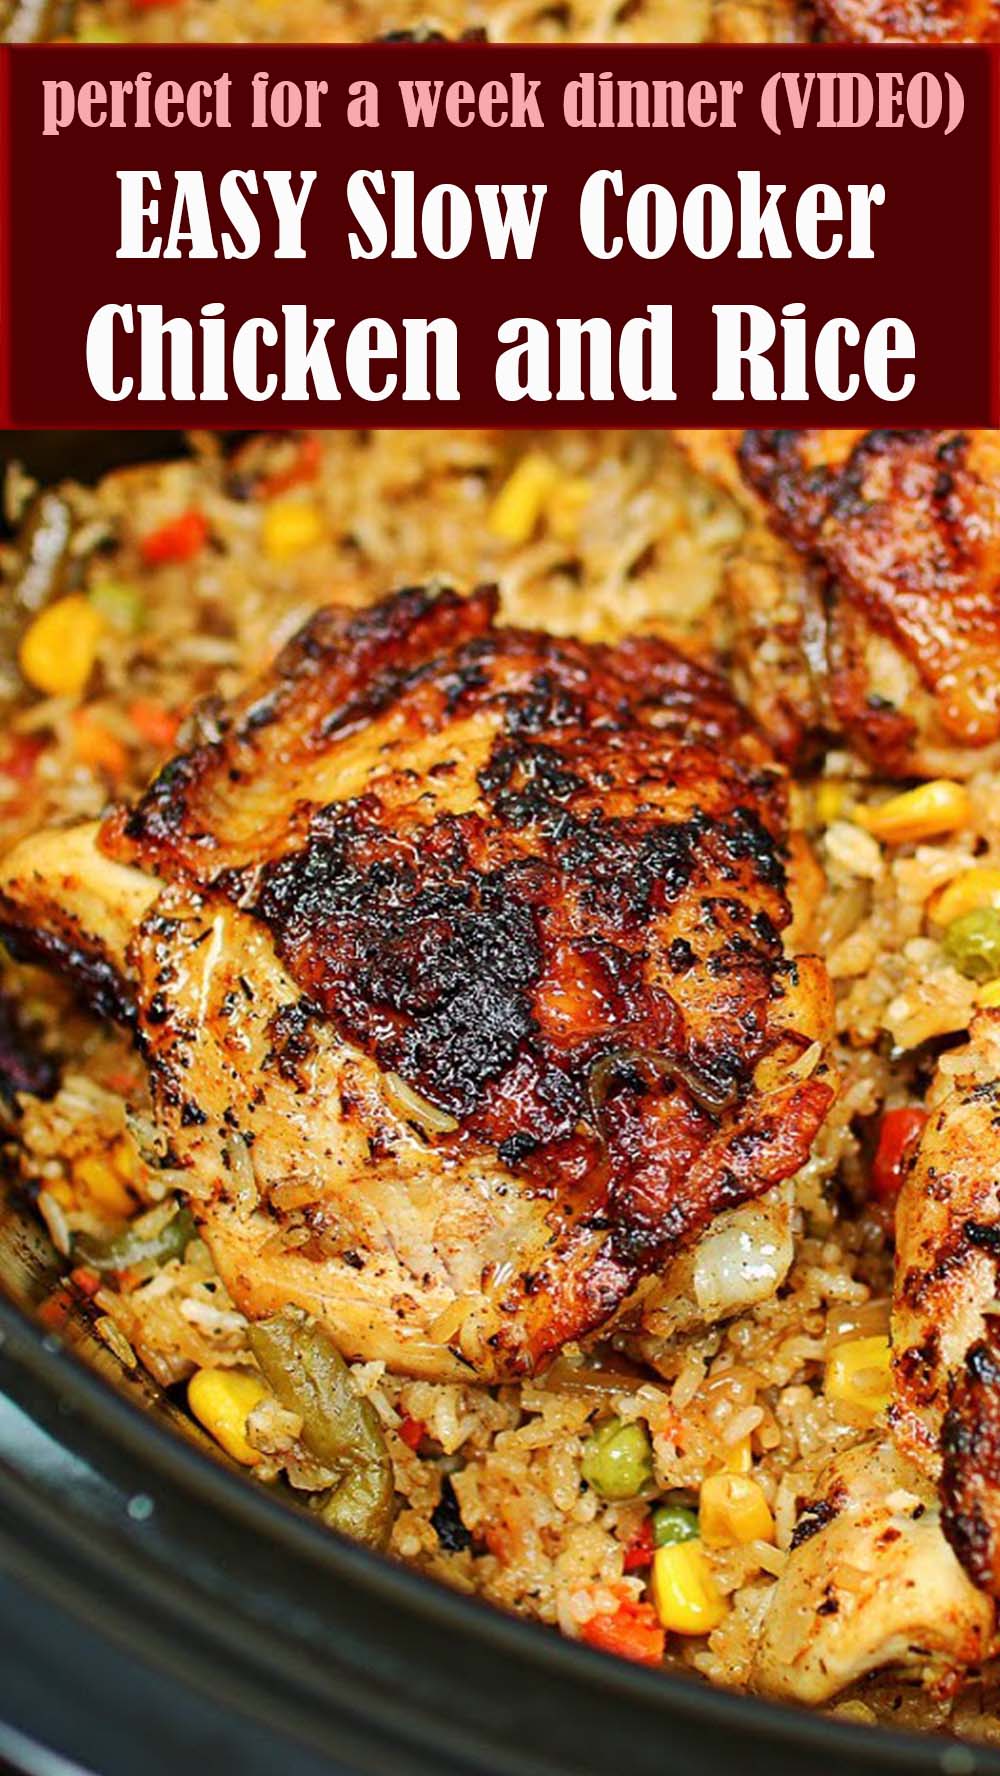 EASY Slow Cooker Chicken and Rice Recipe with VIDEO – Reserveamana